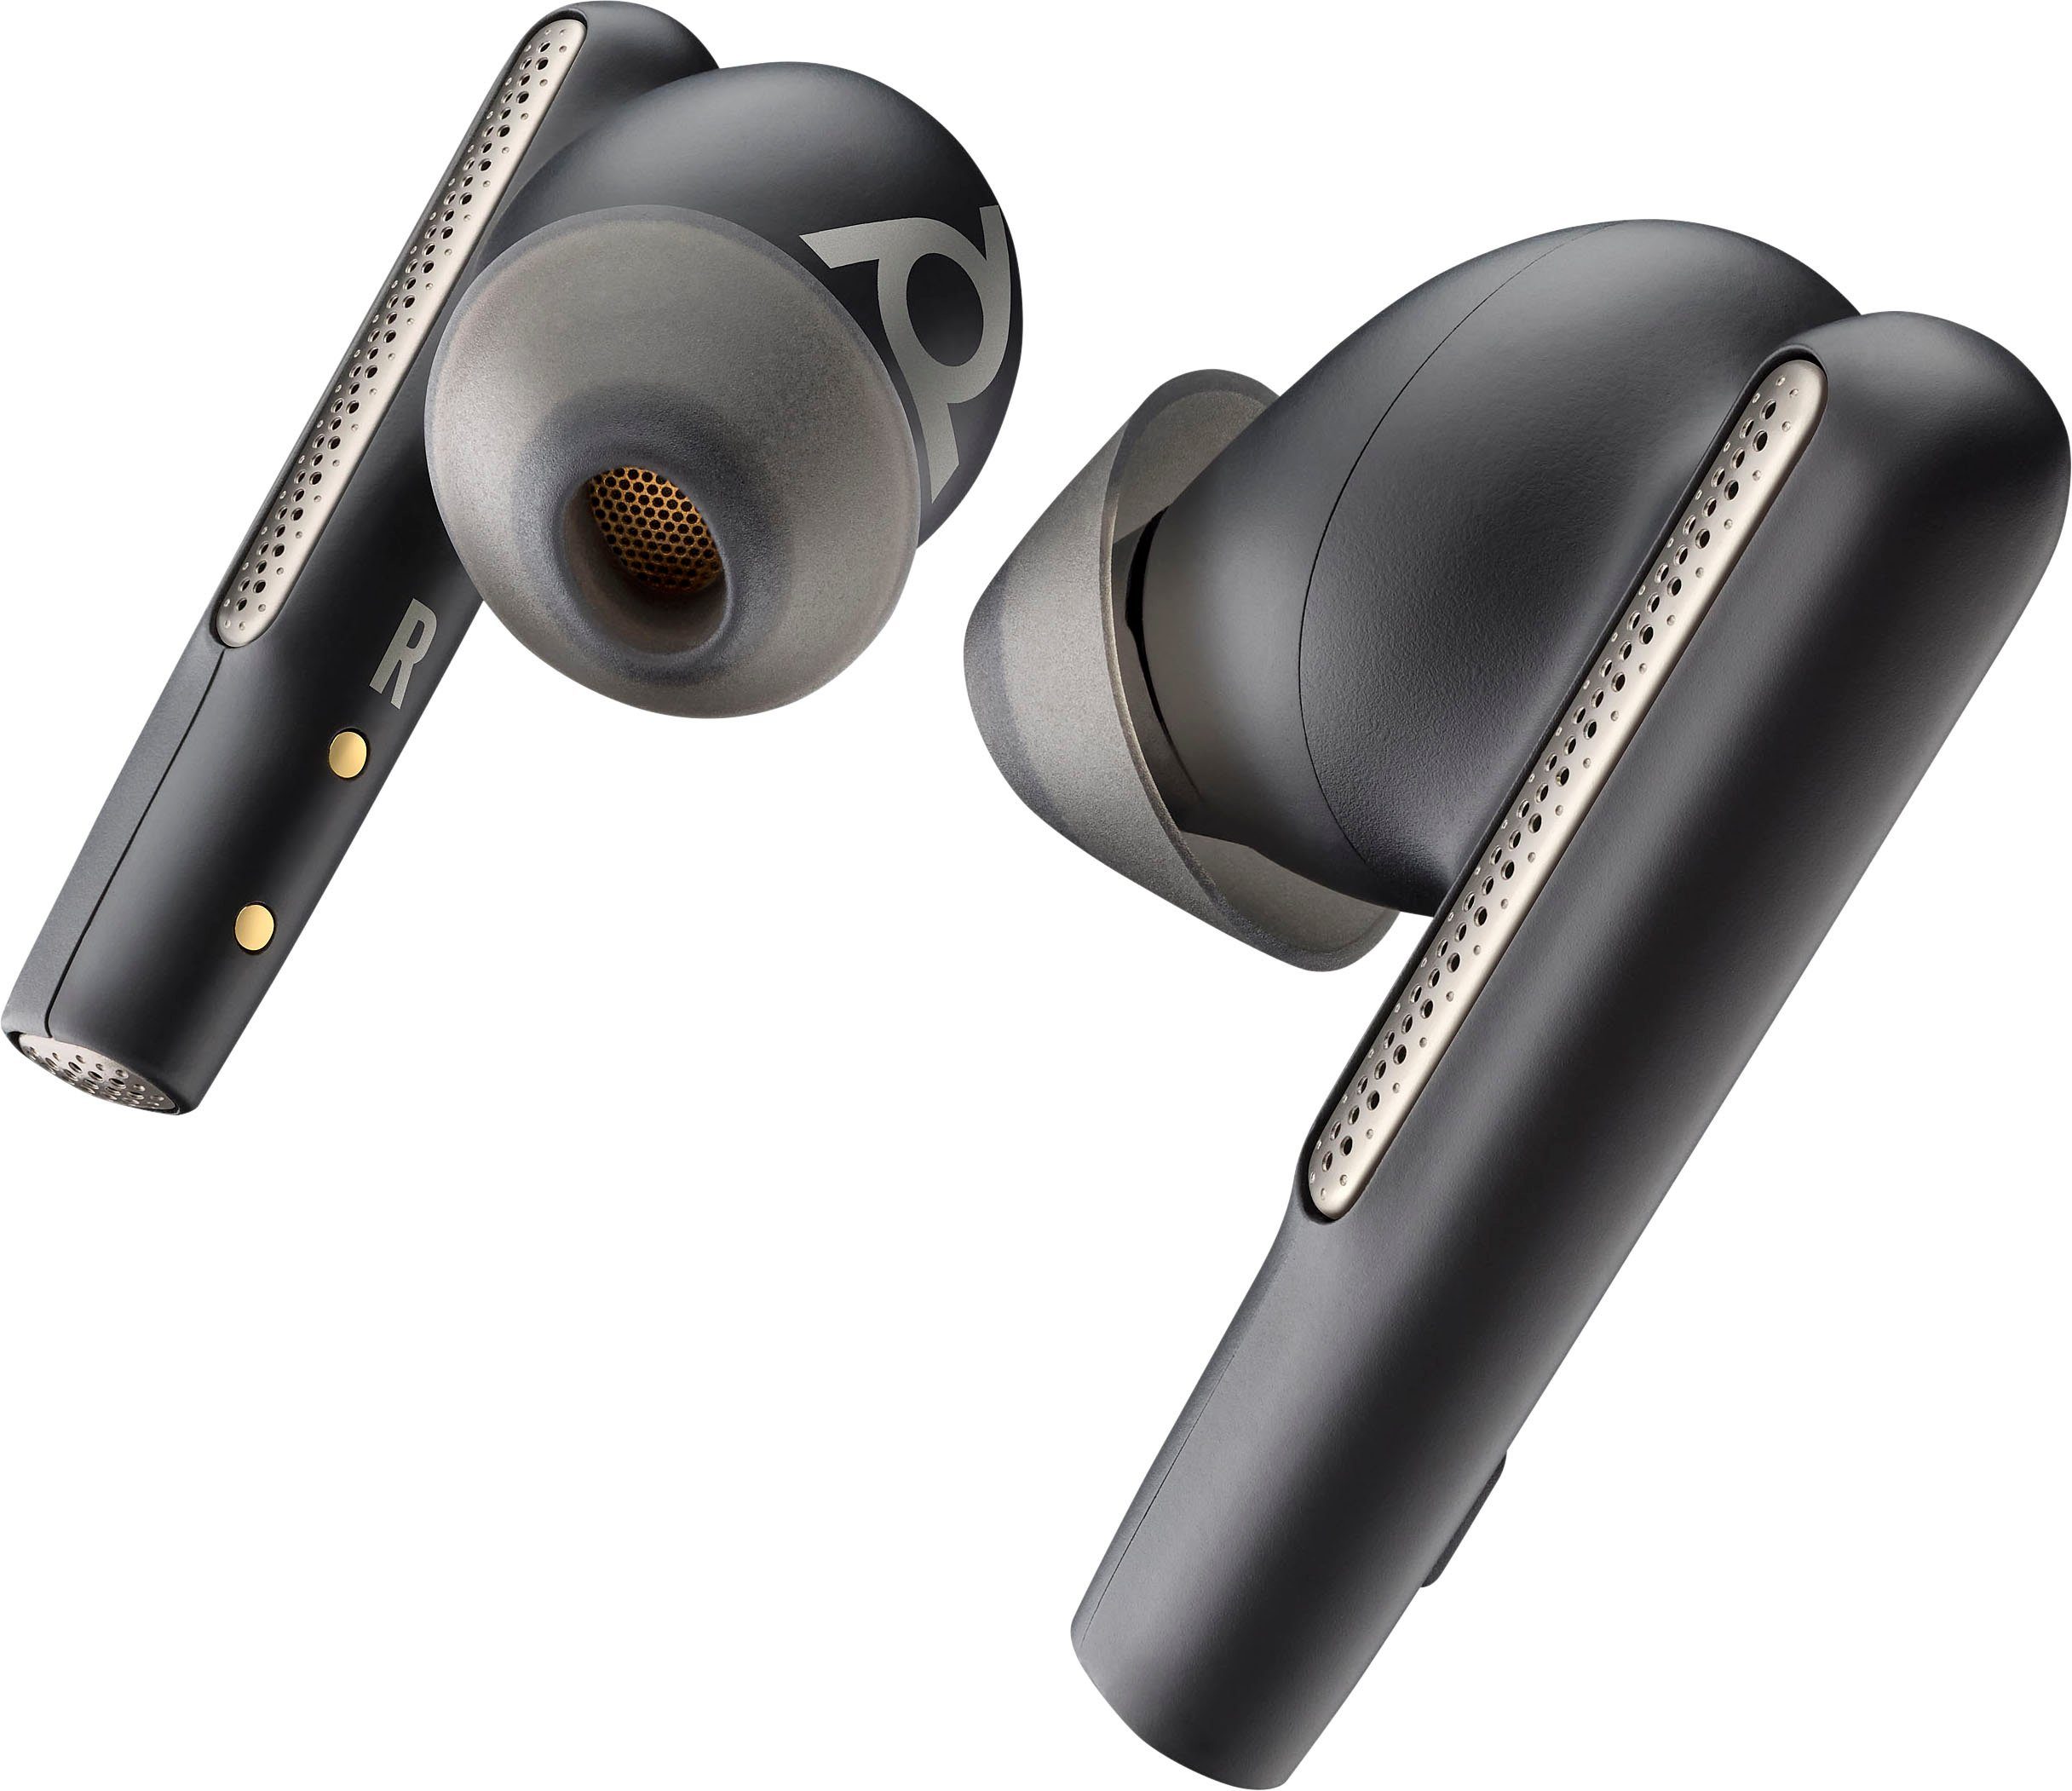 Poly Voyager USB-C/A) 60 wireless In-Ear-Kopfhörer (Active UC Noise Cancelling (ANC), Free